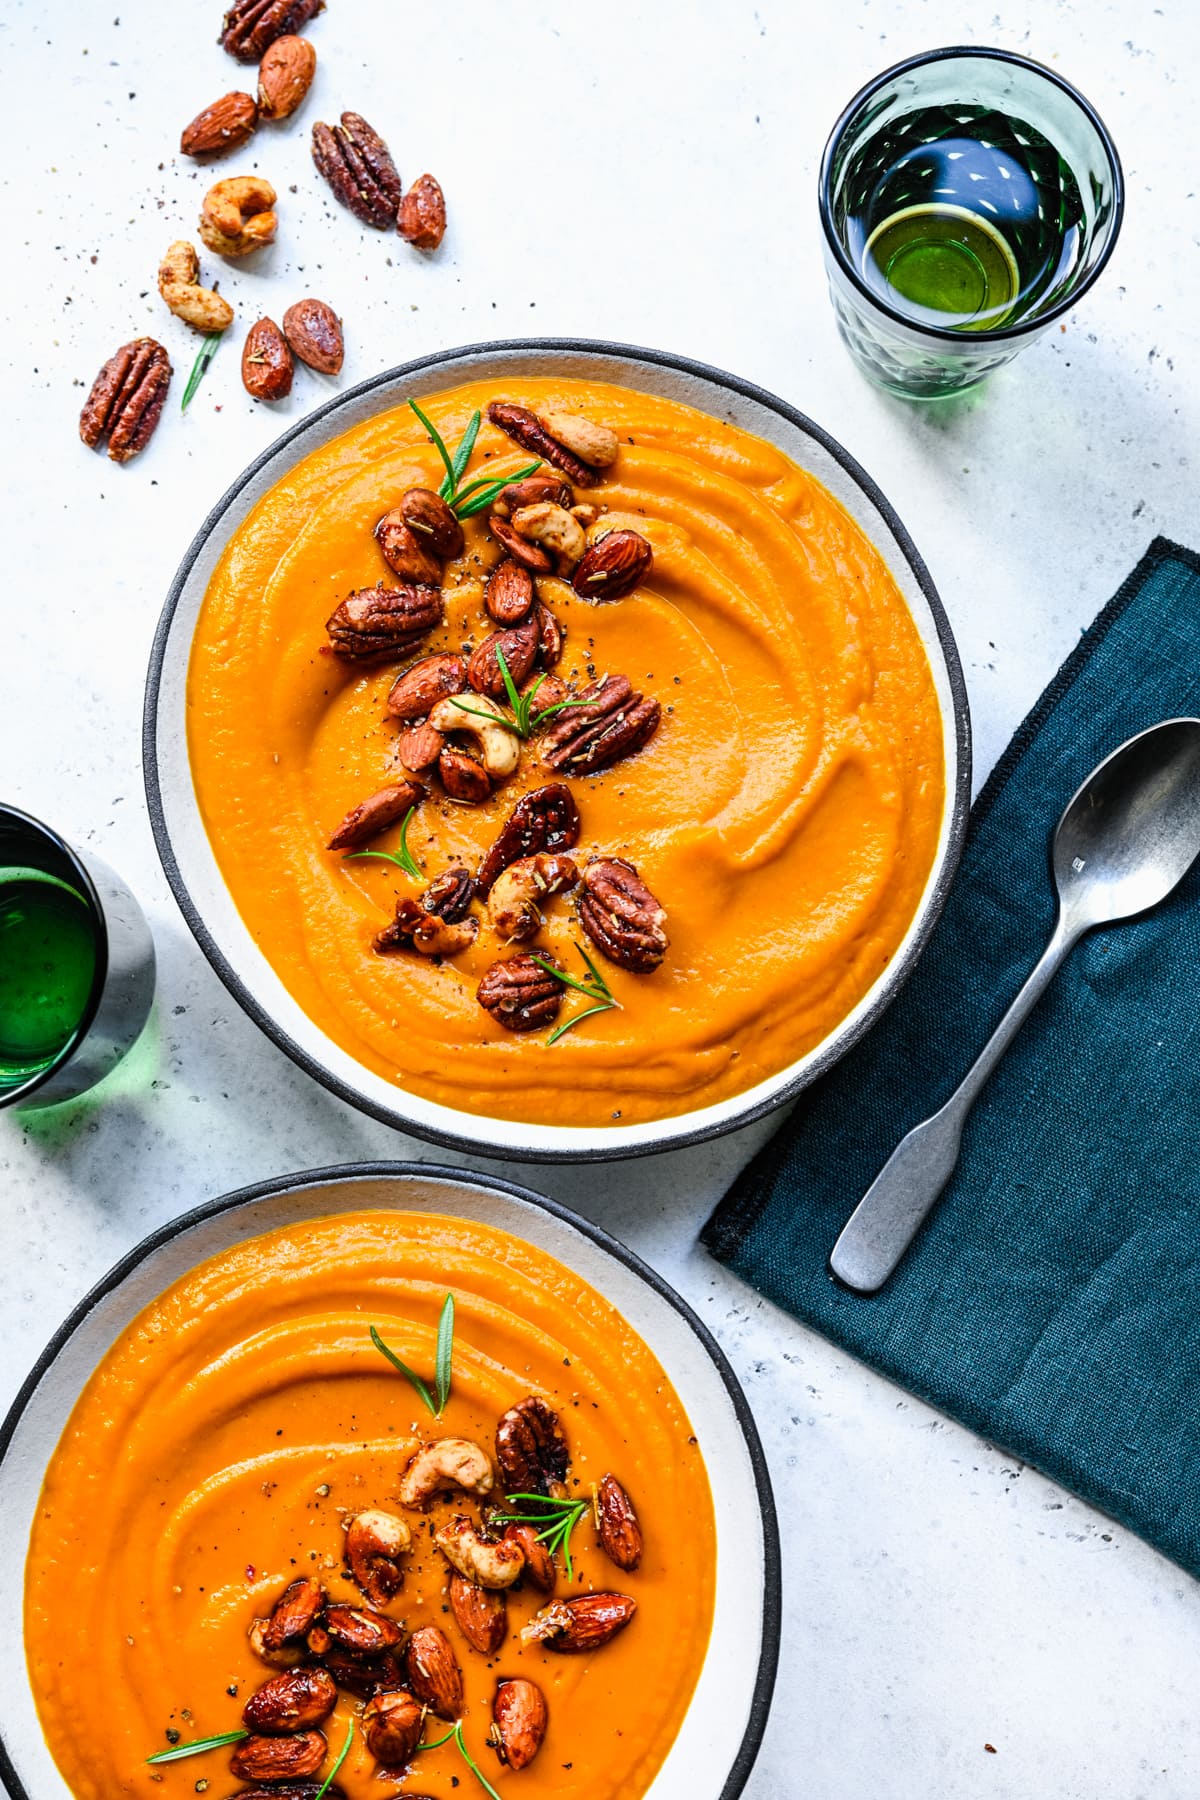 Finished pumpkin sweet potato soup in bowls and topped with nuts.